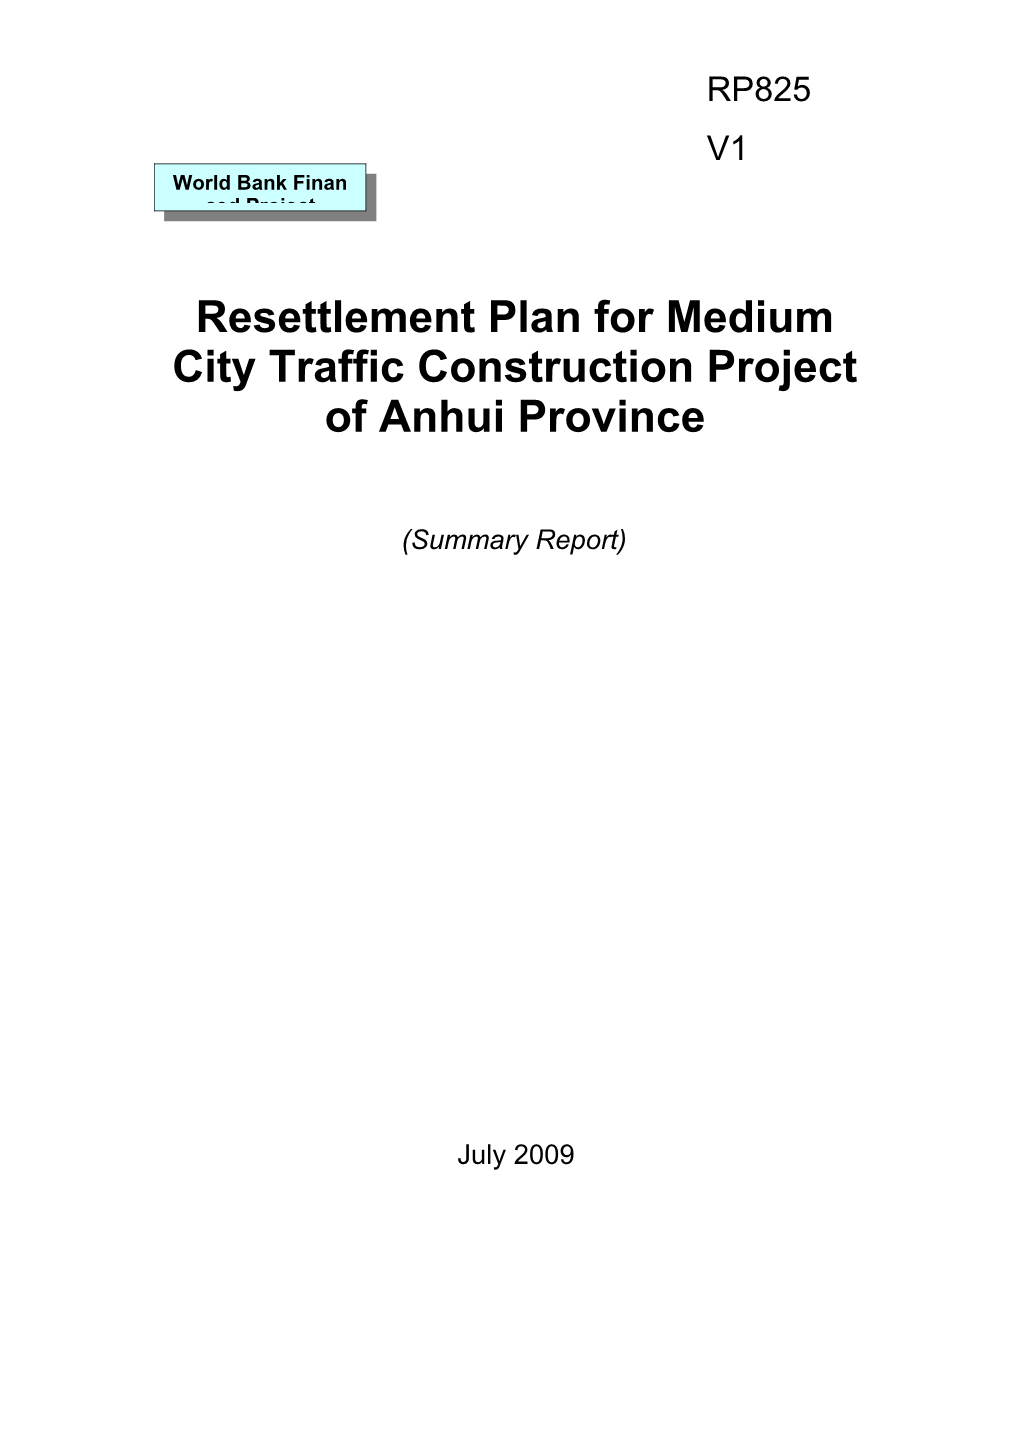 Resettlement Plan for Medium City Traffic Construction Project of Anhui Province